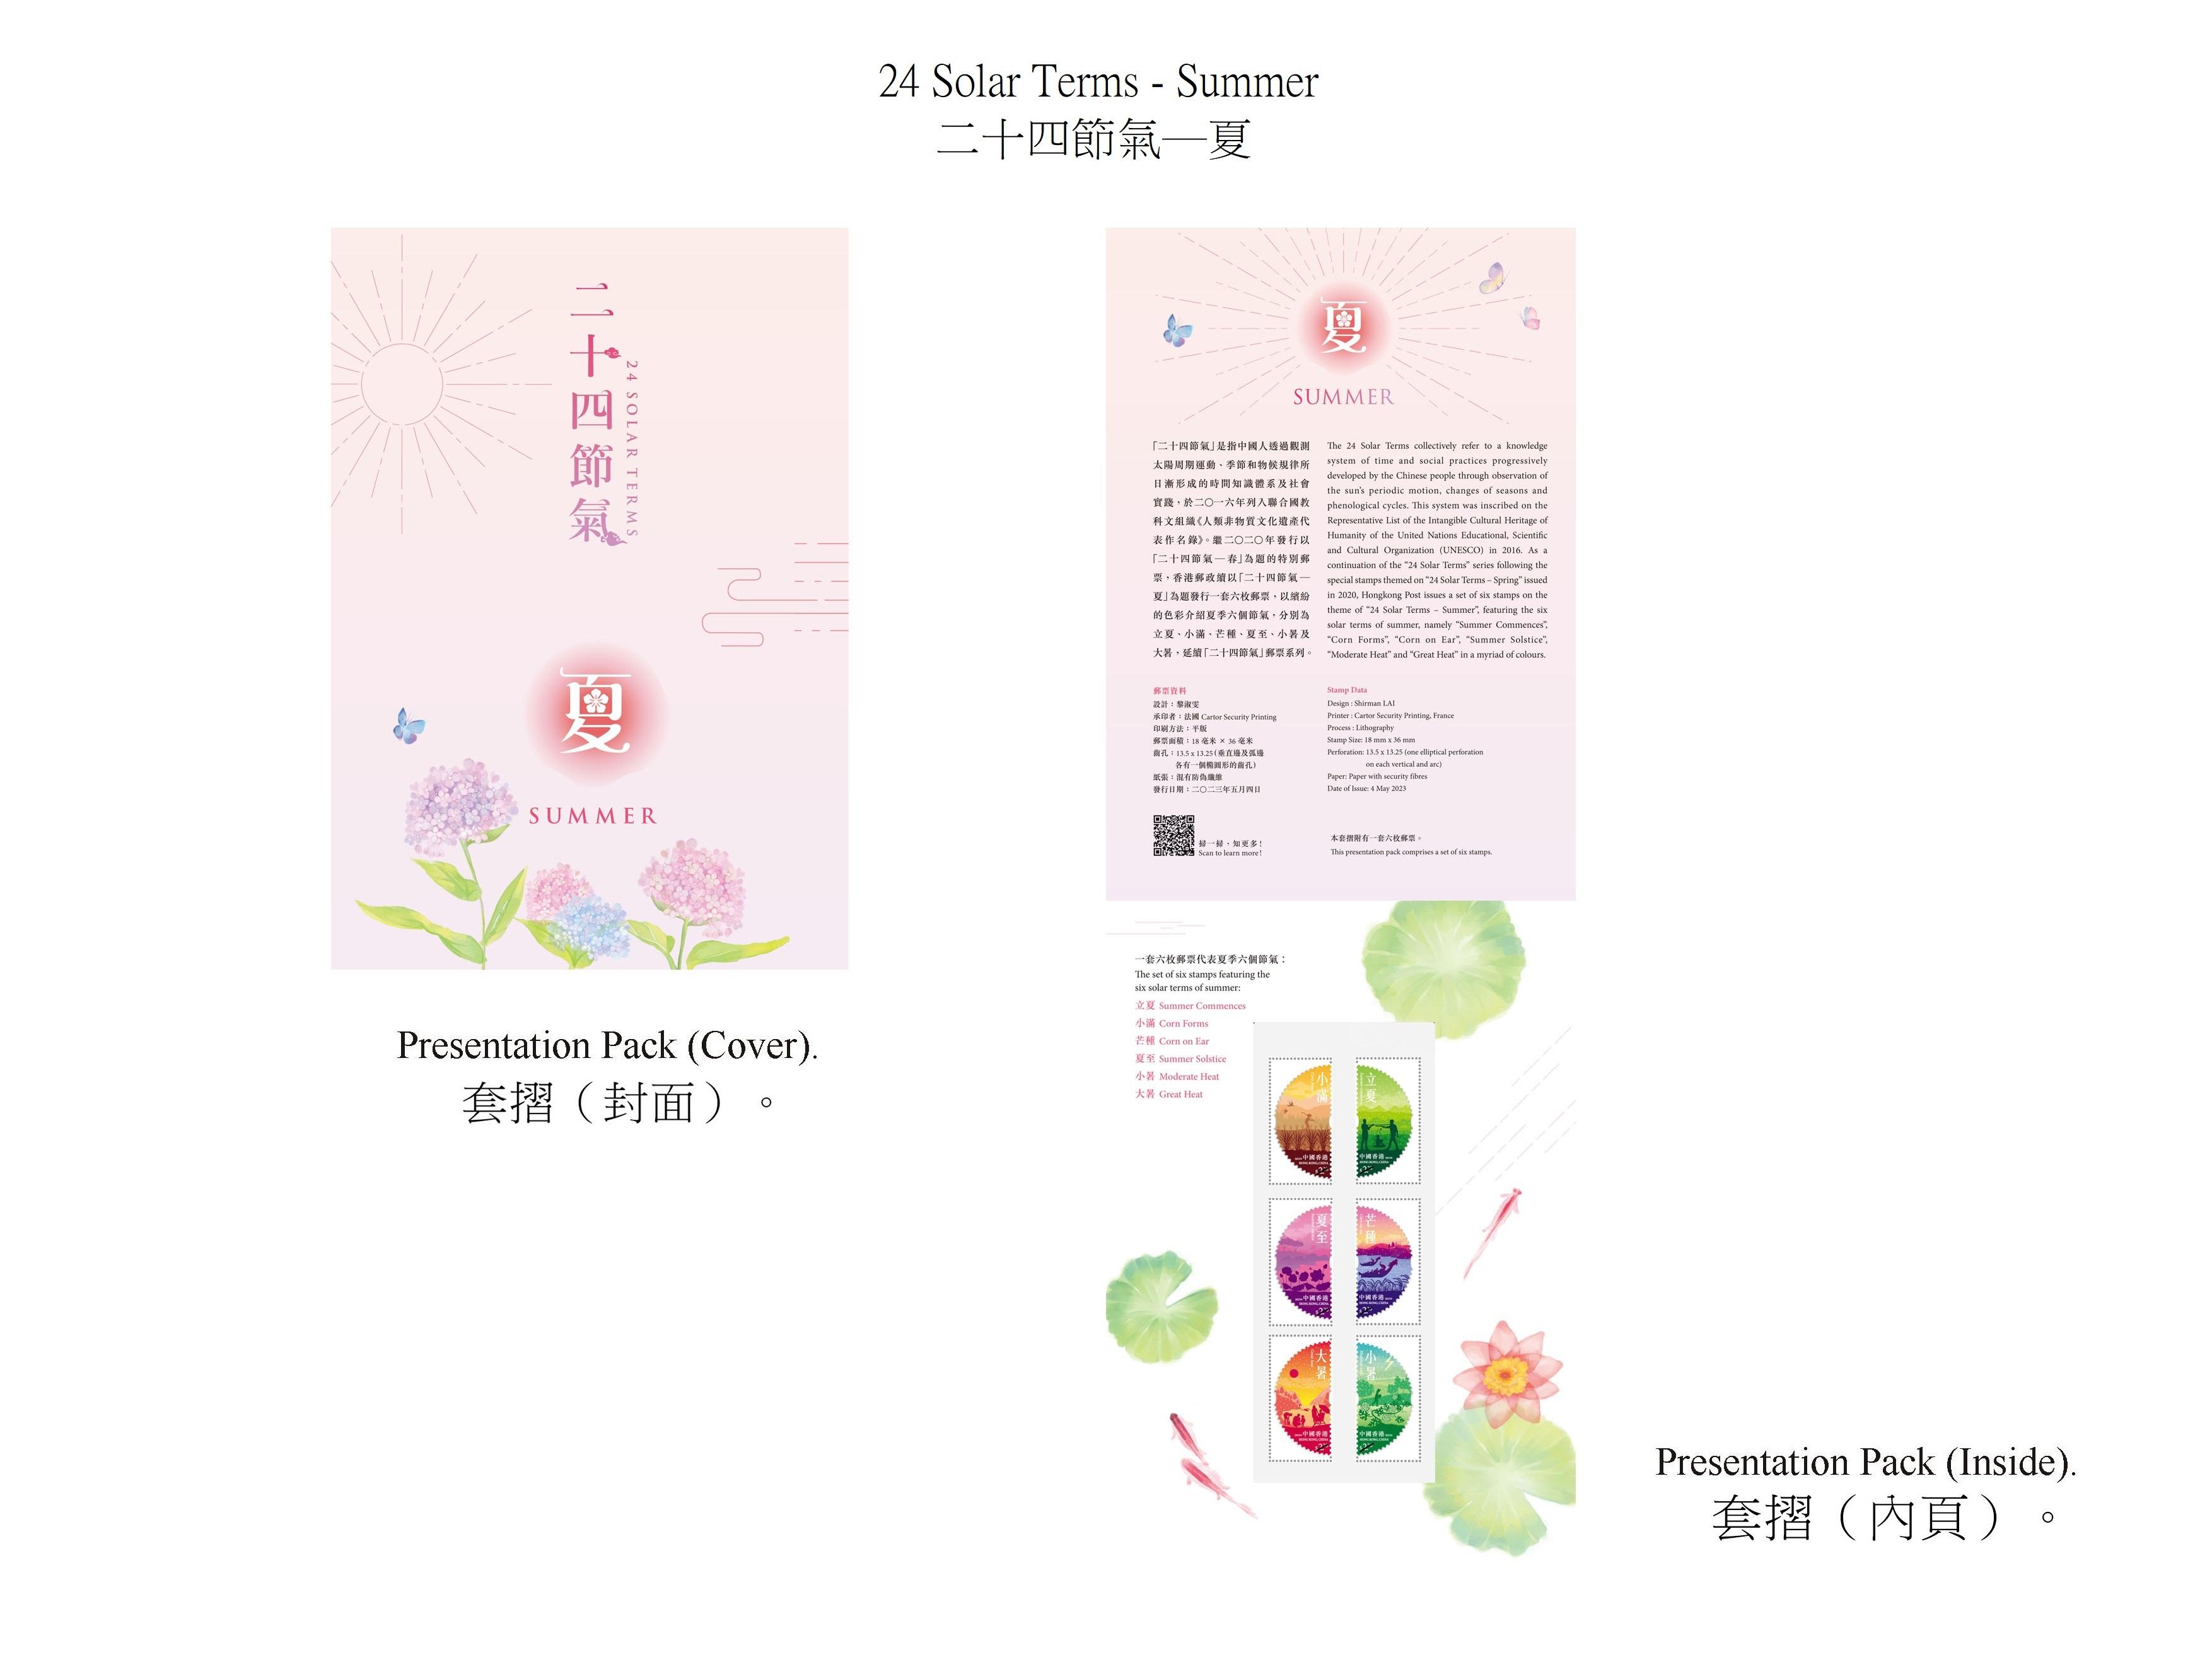 Hongkong Post will launch a special stamp issue and associated philatelic products on the theme of "24 Solar Terms - Summer" on May 4 (Thursday). Photo shows the presentation pack.